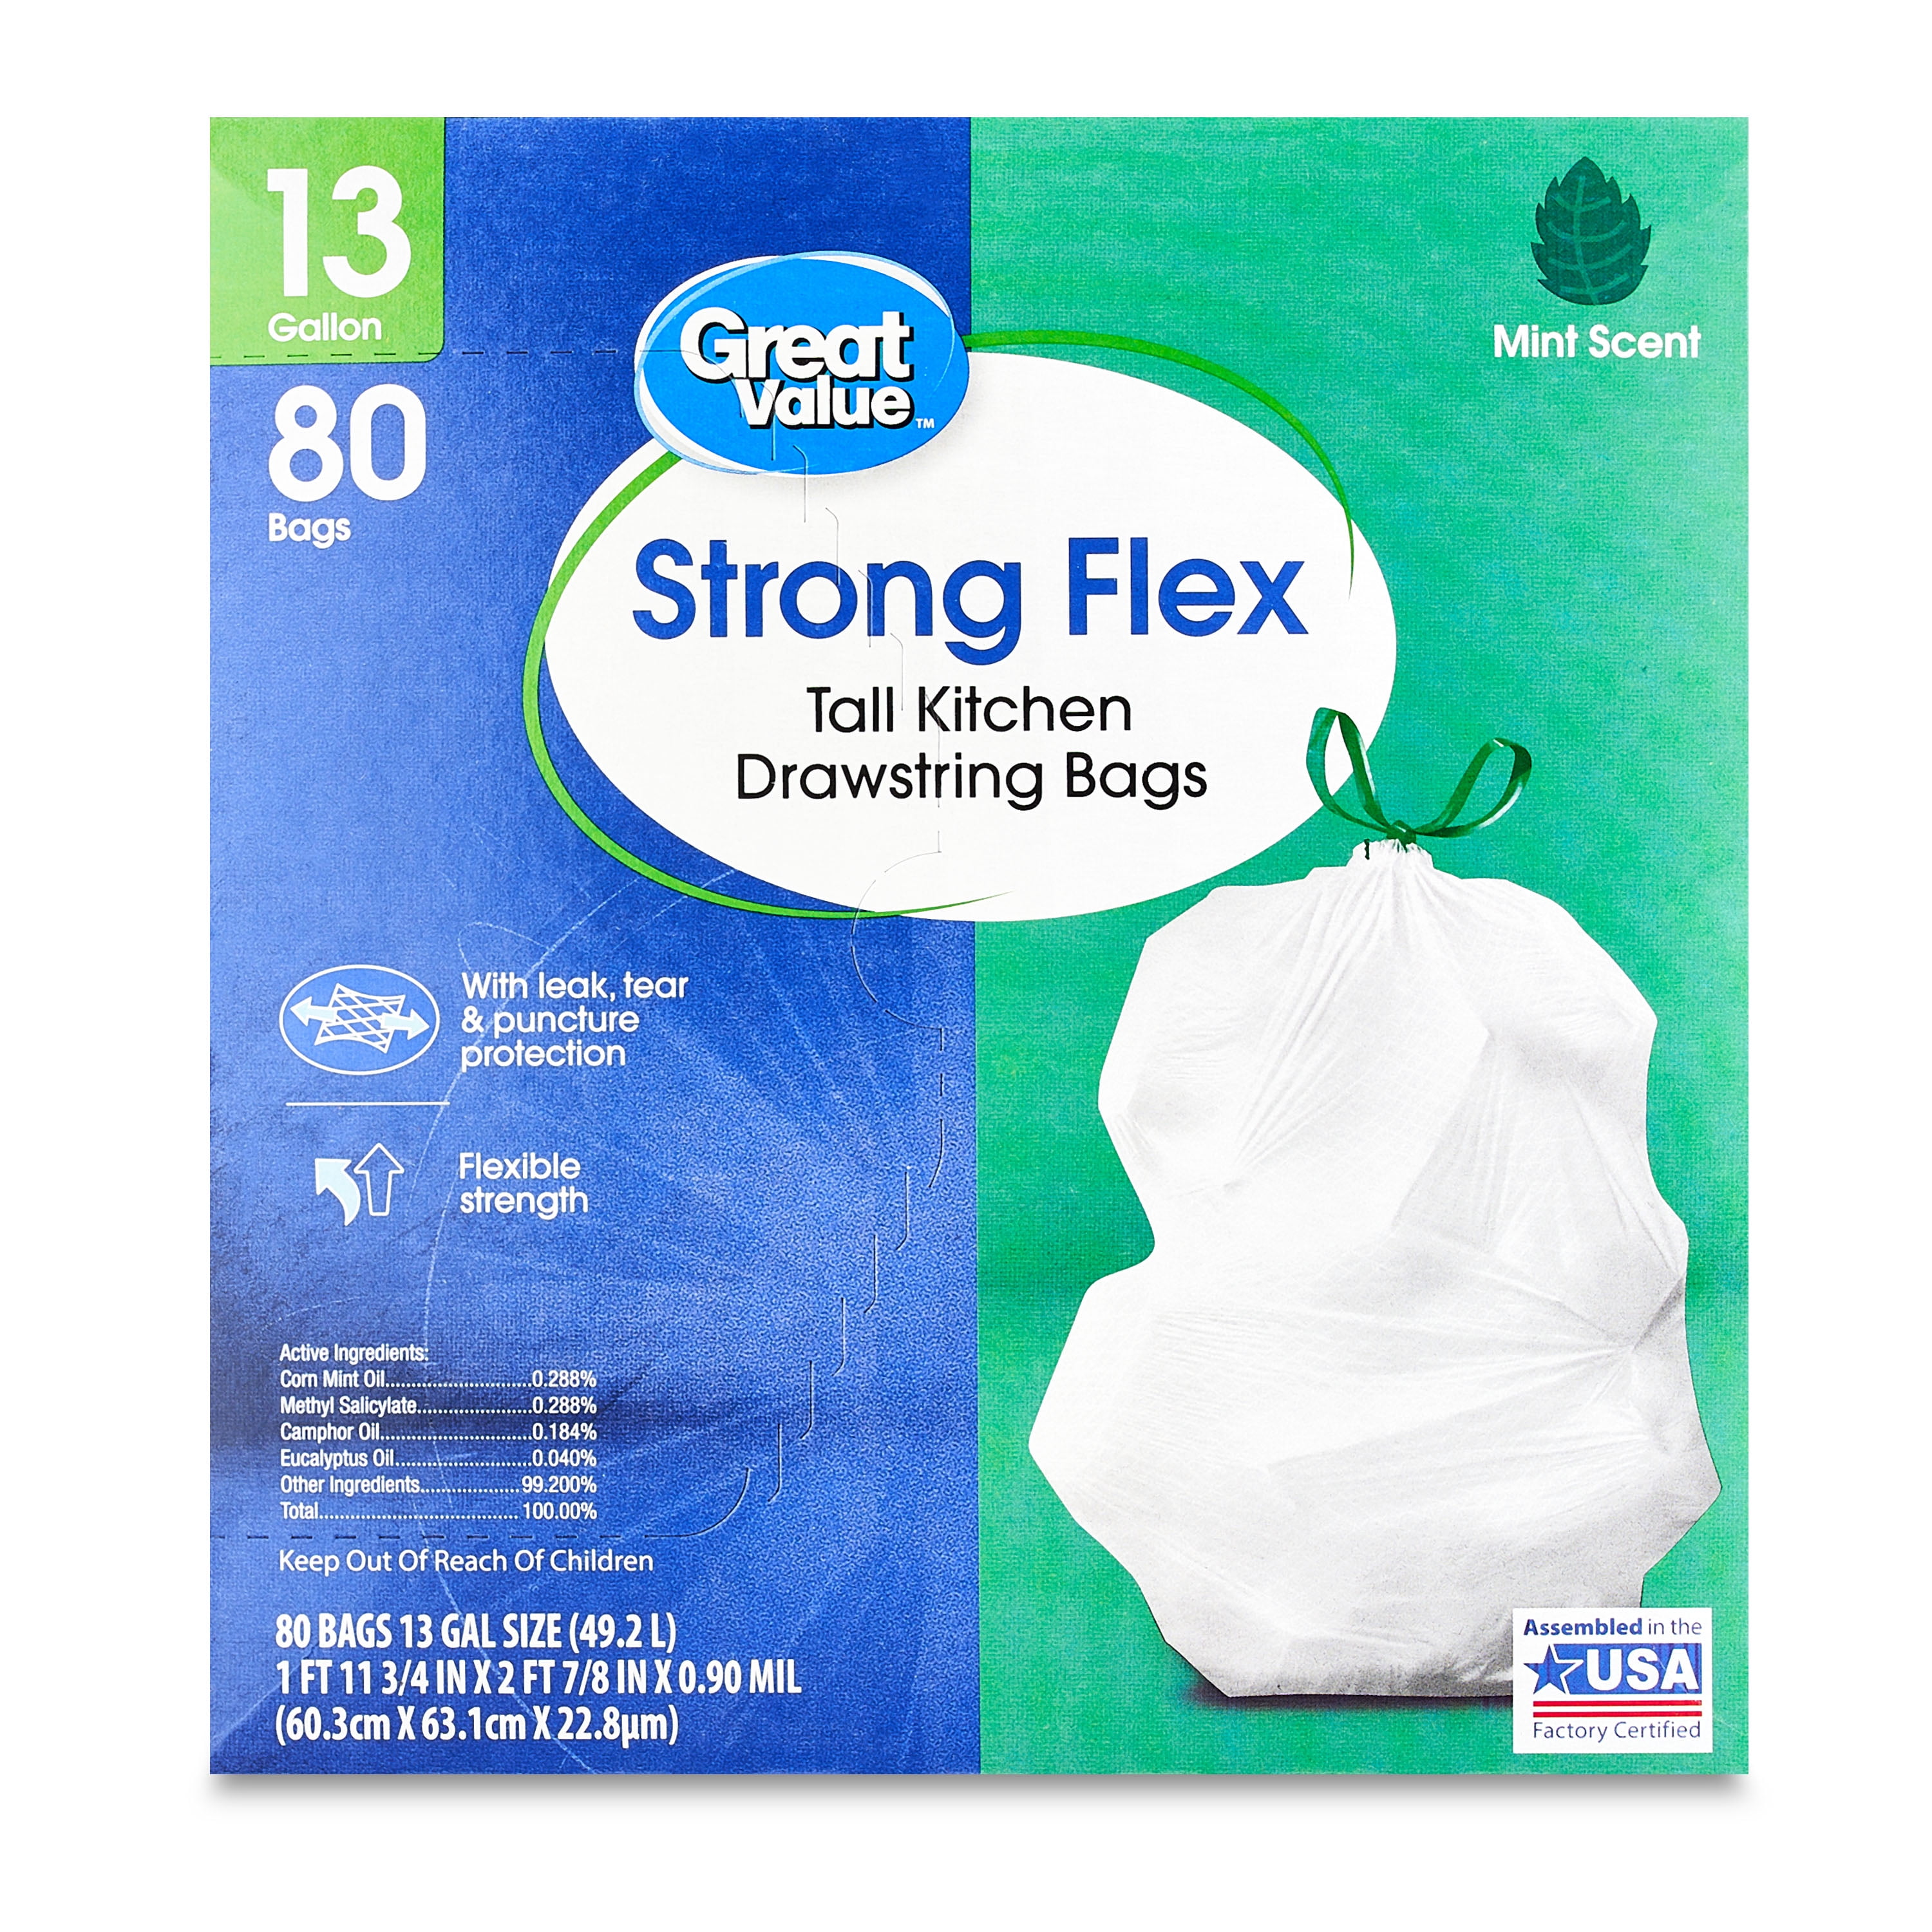 Great Value 13-Gallon Drawstring Strong Flex Tall Kitchen Bags, Unscented,  80 Bags 